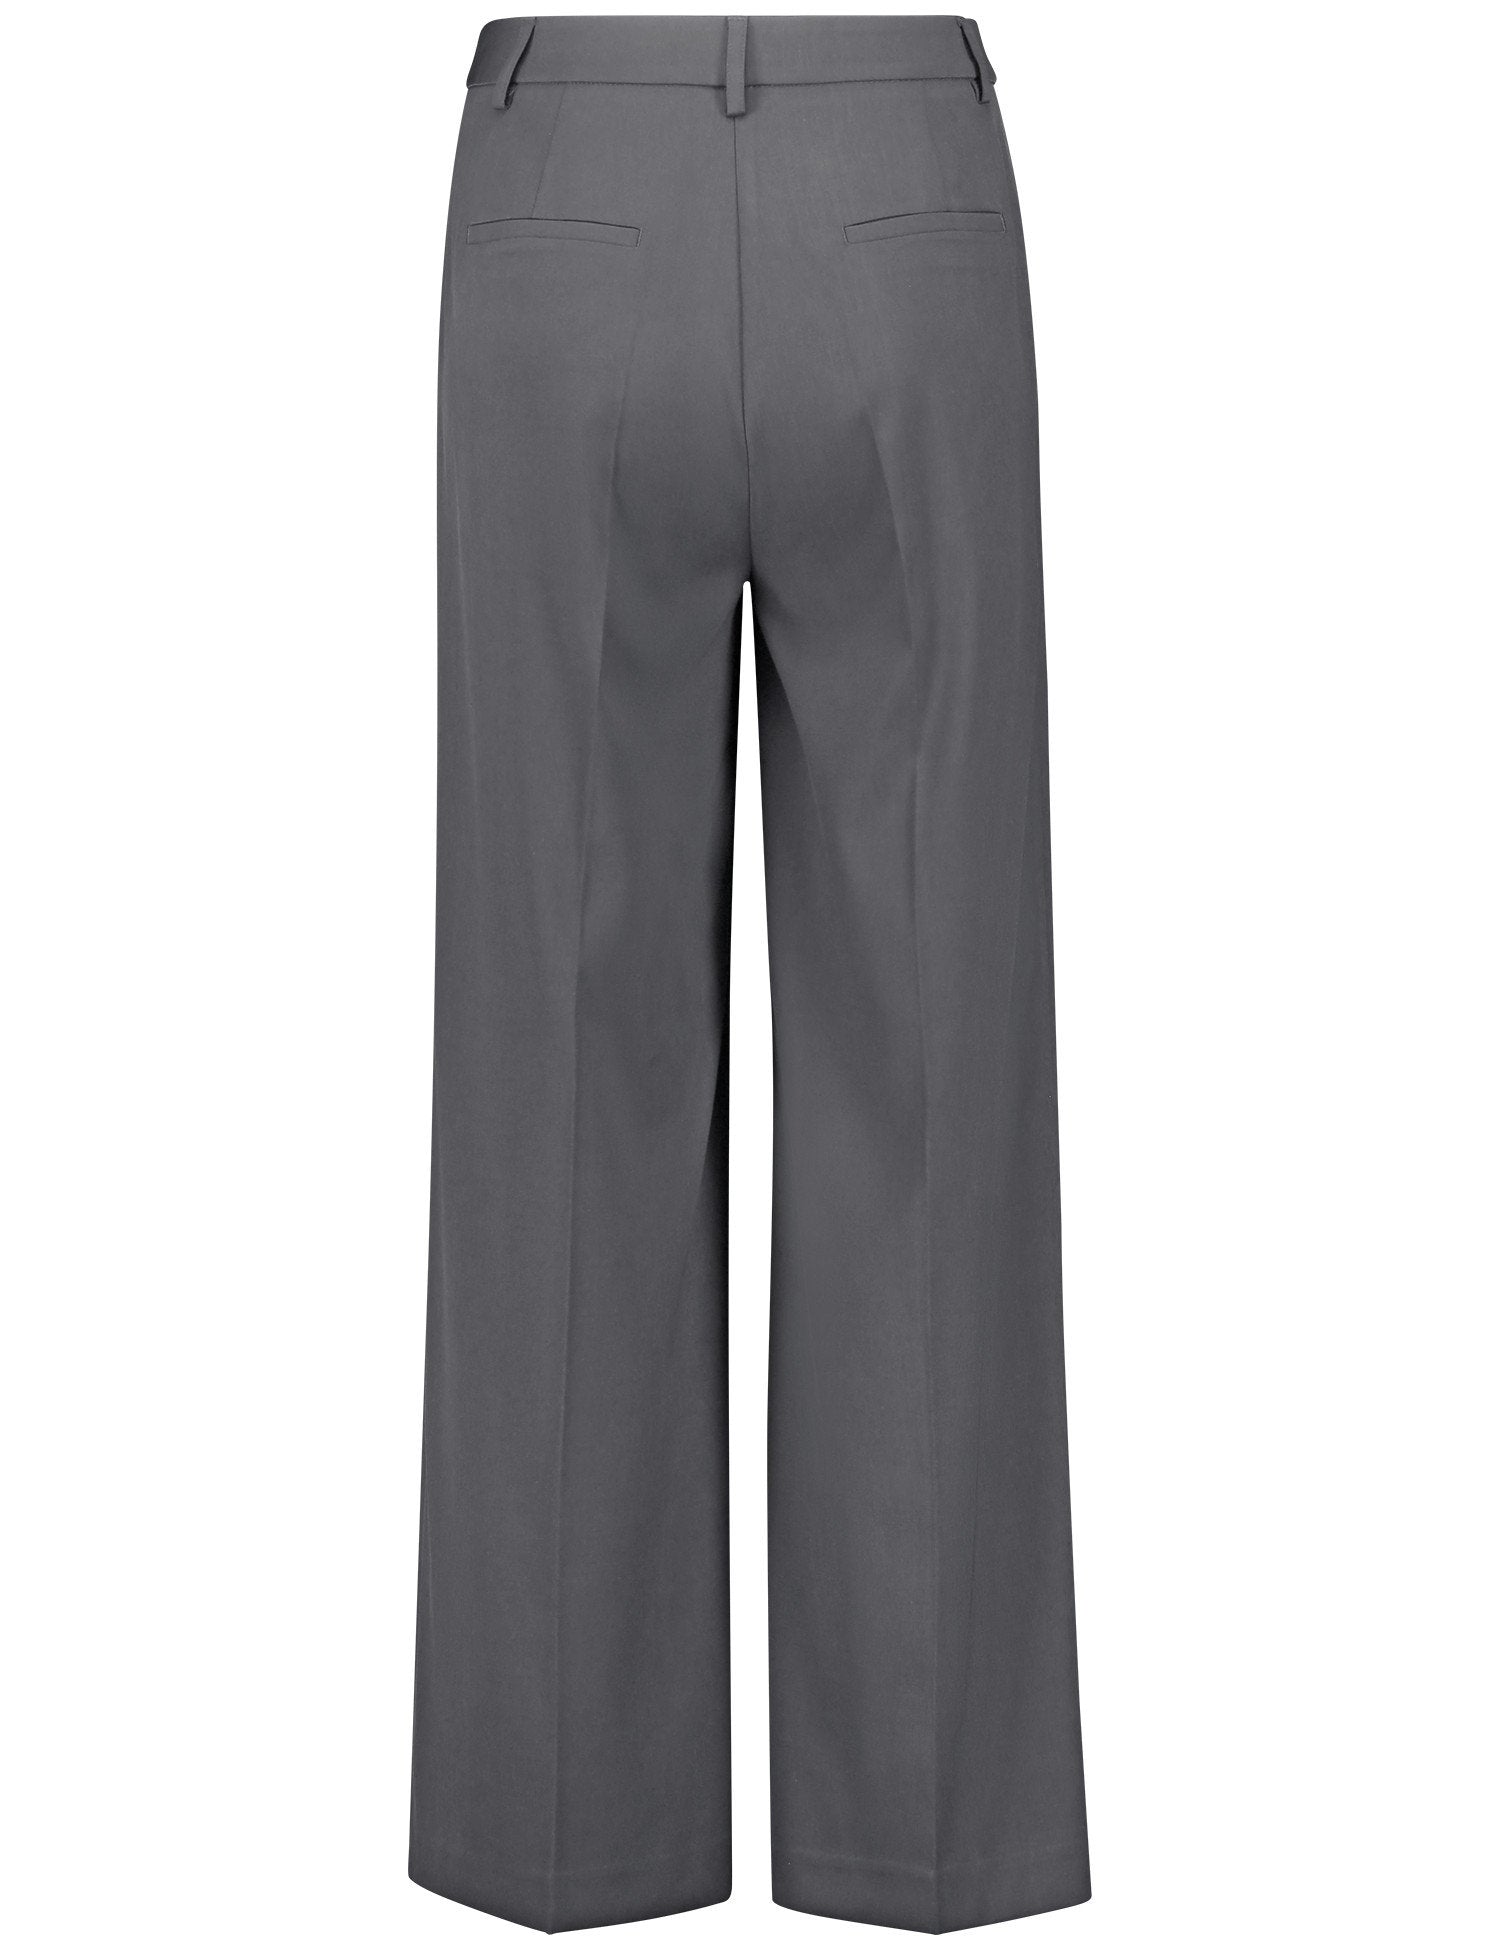 Wide Leg Trousers With Pressed Pleats_420435-11254_2210_02